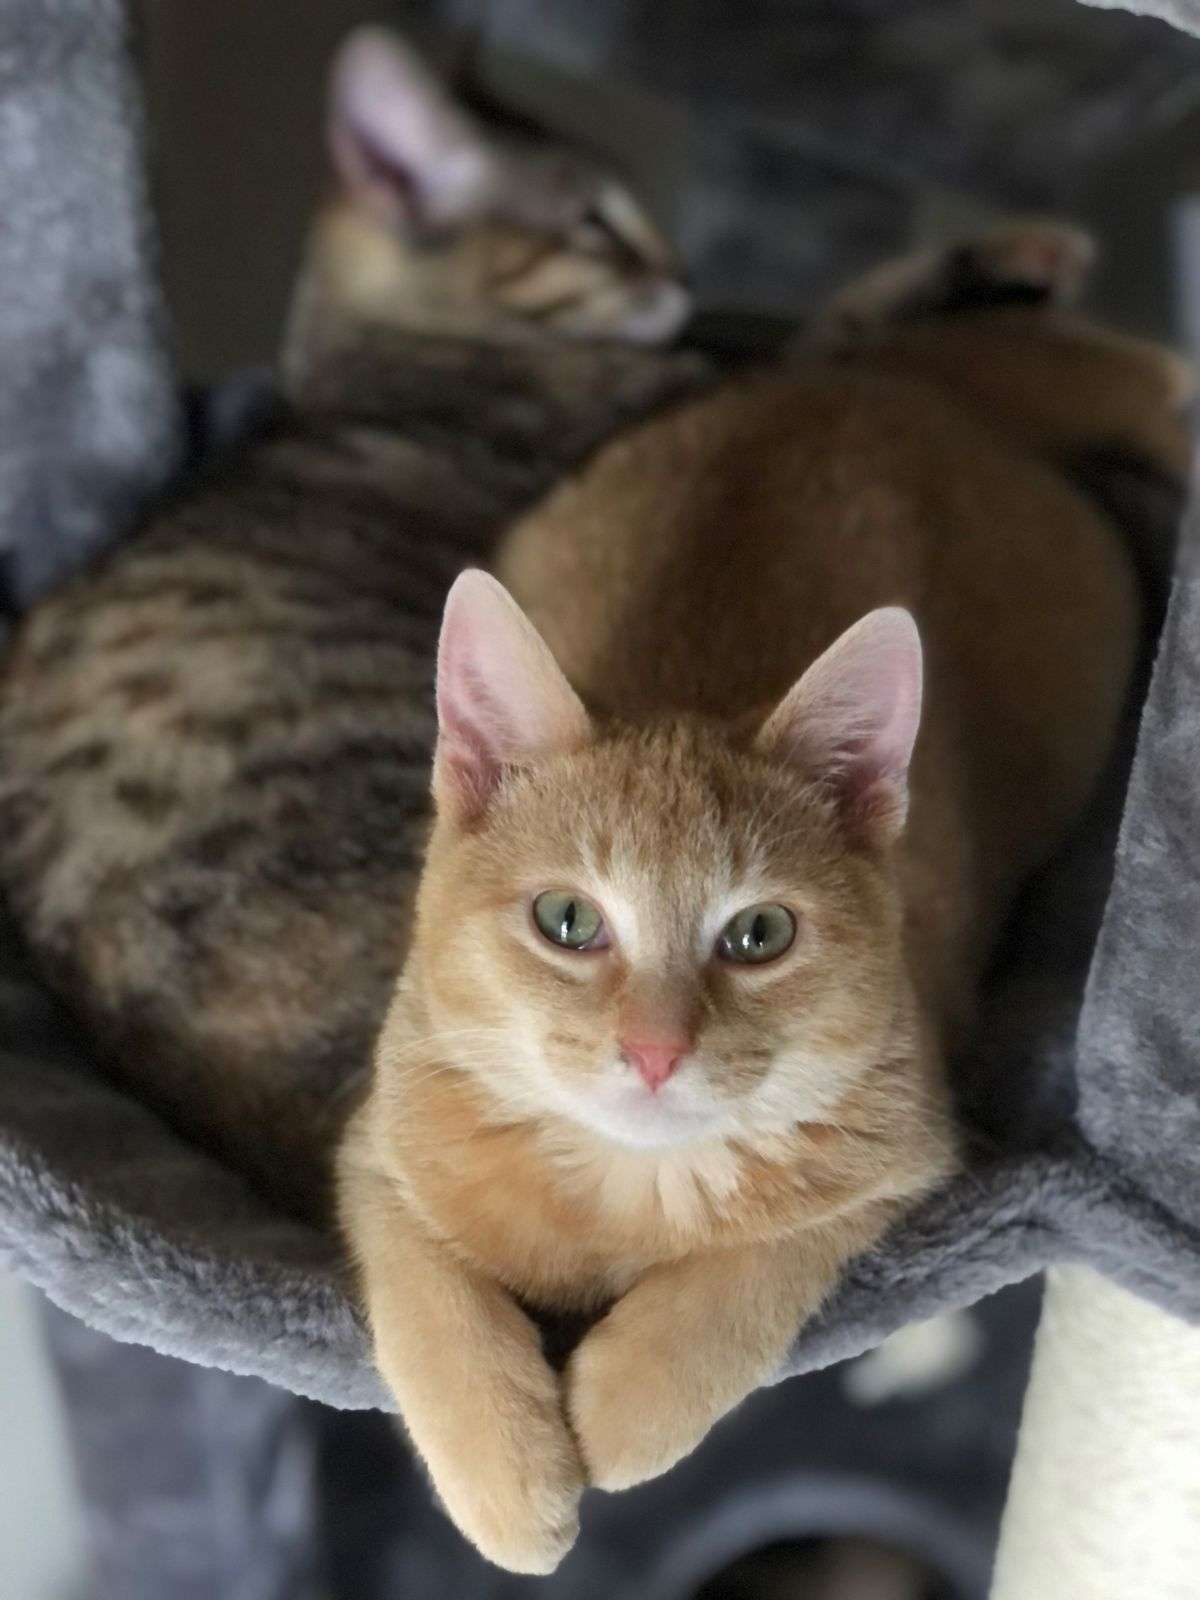 orange tabby cat poses for photo in front and brown tabby cat tries to sleep in background.